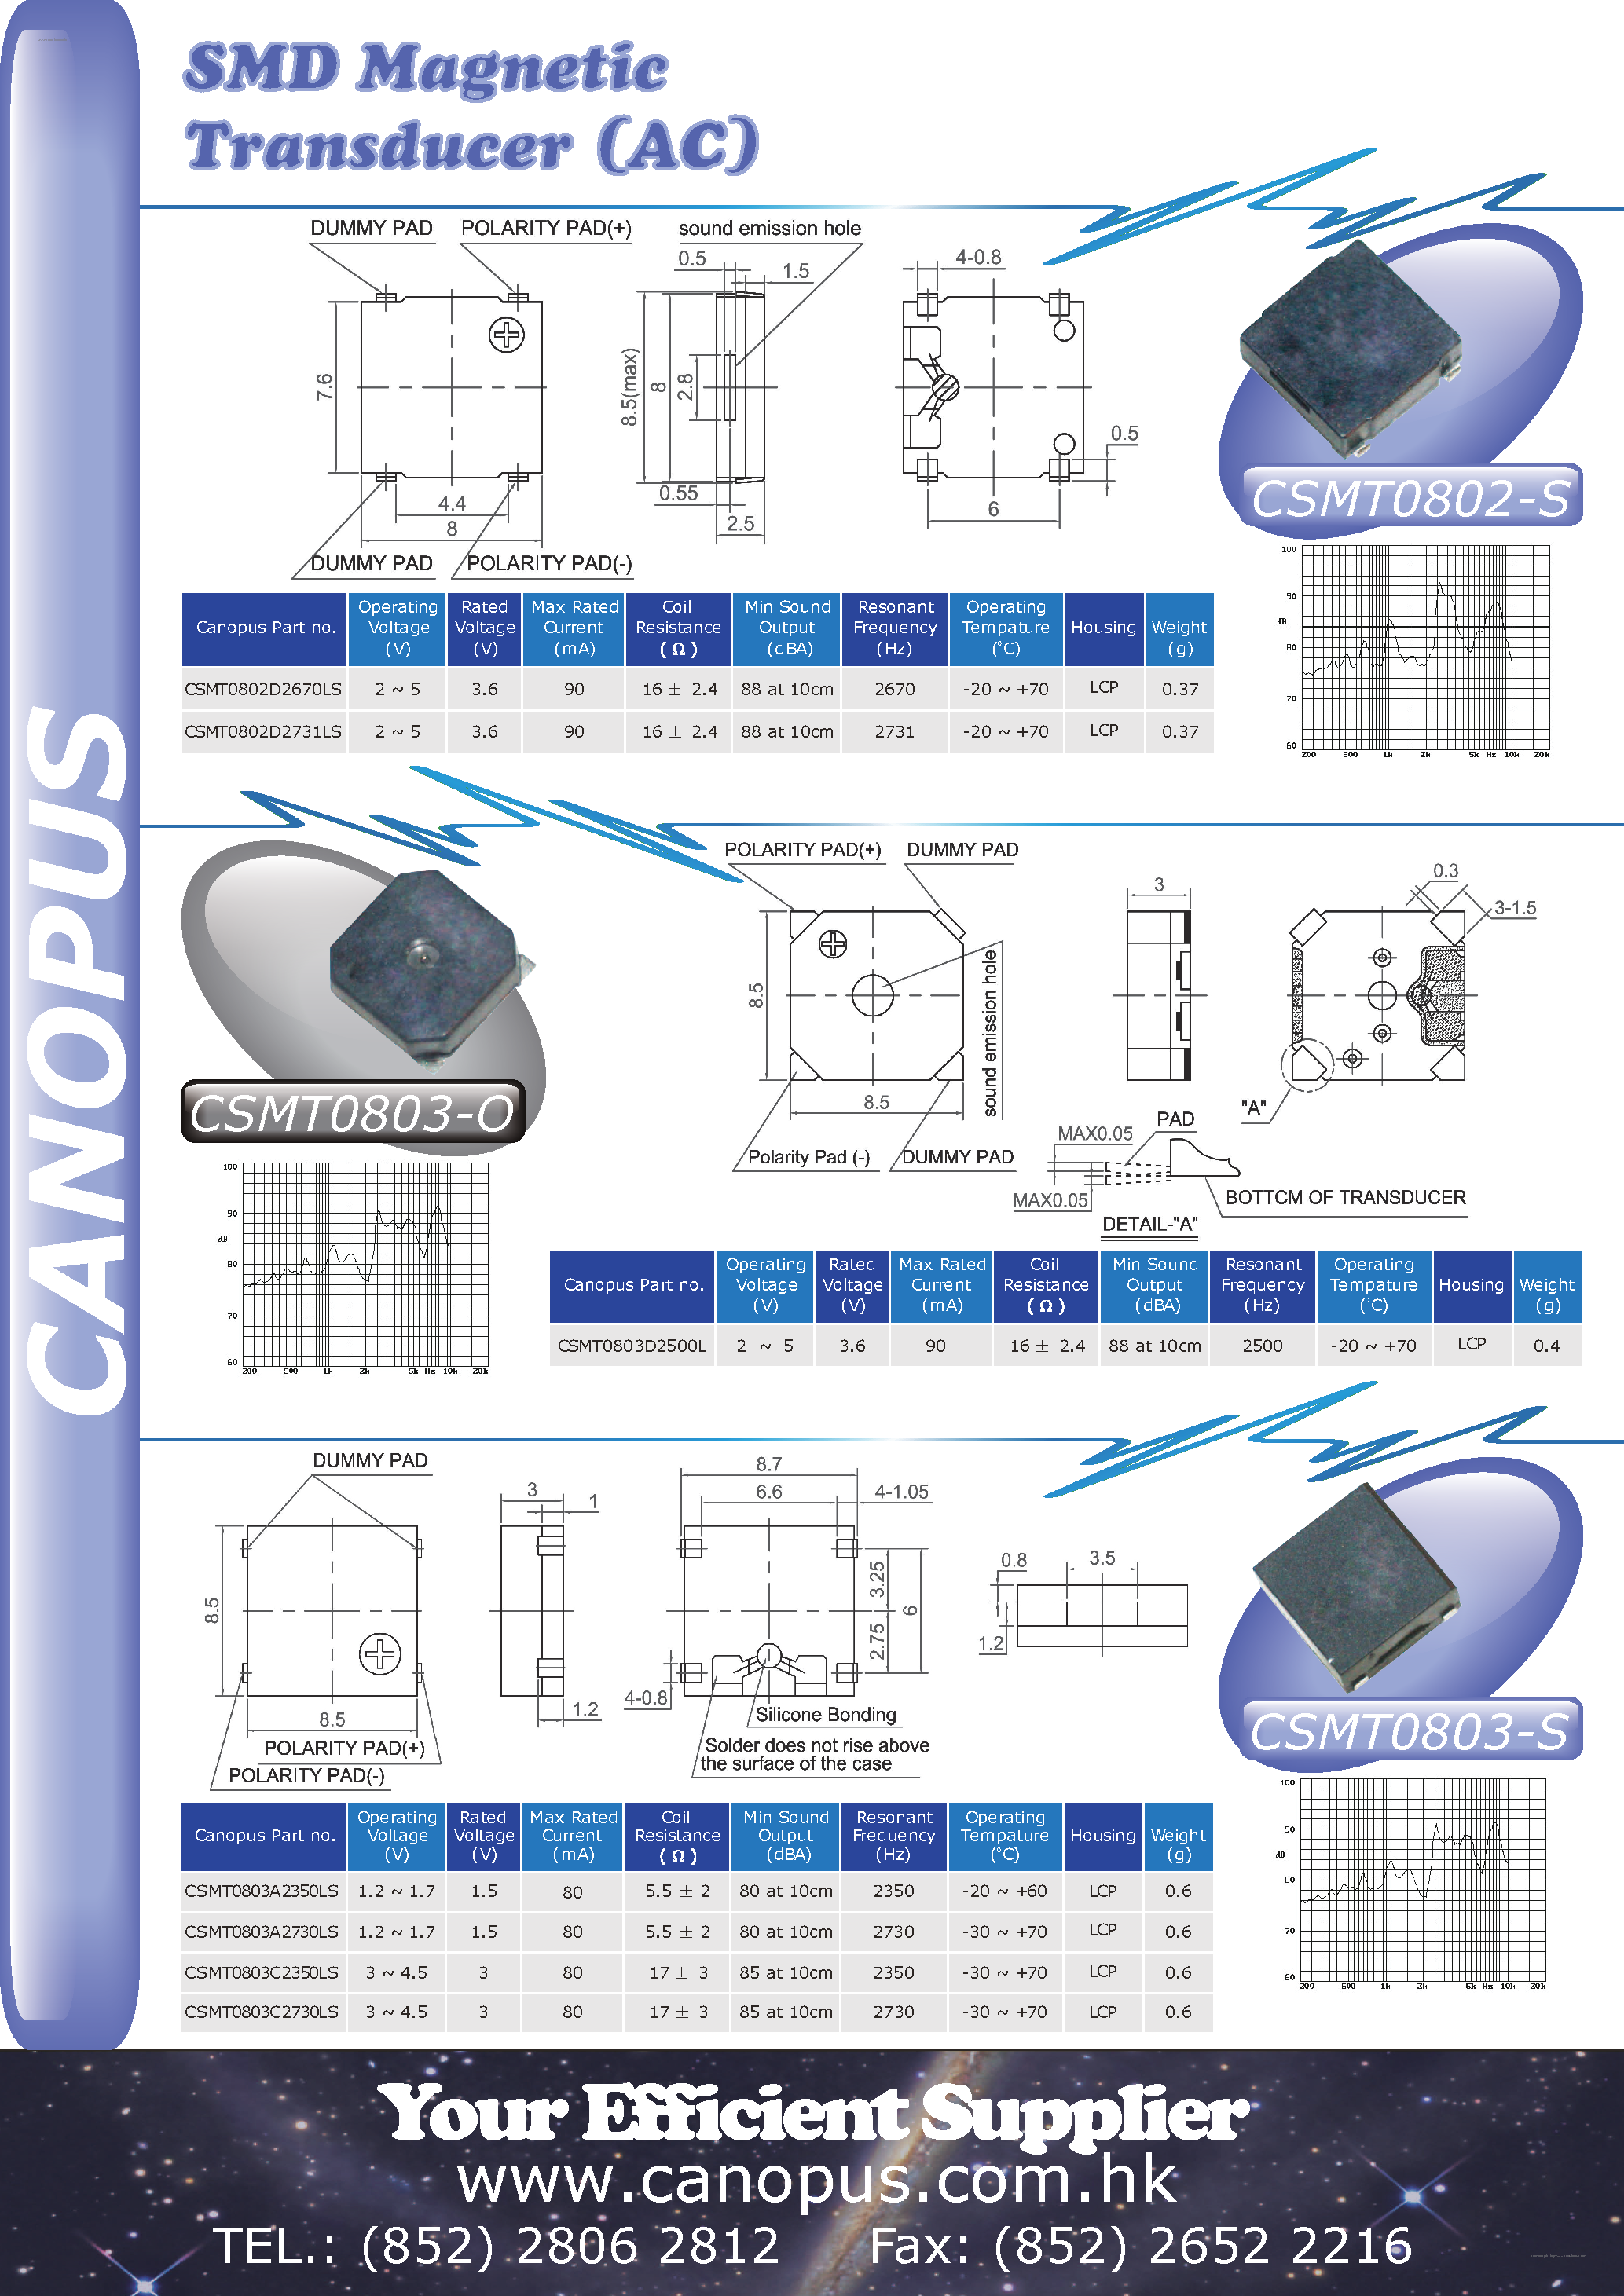 Datasheet CSMT0802-S - SMD Magnetic Transducer page 1